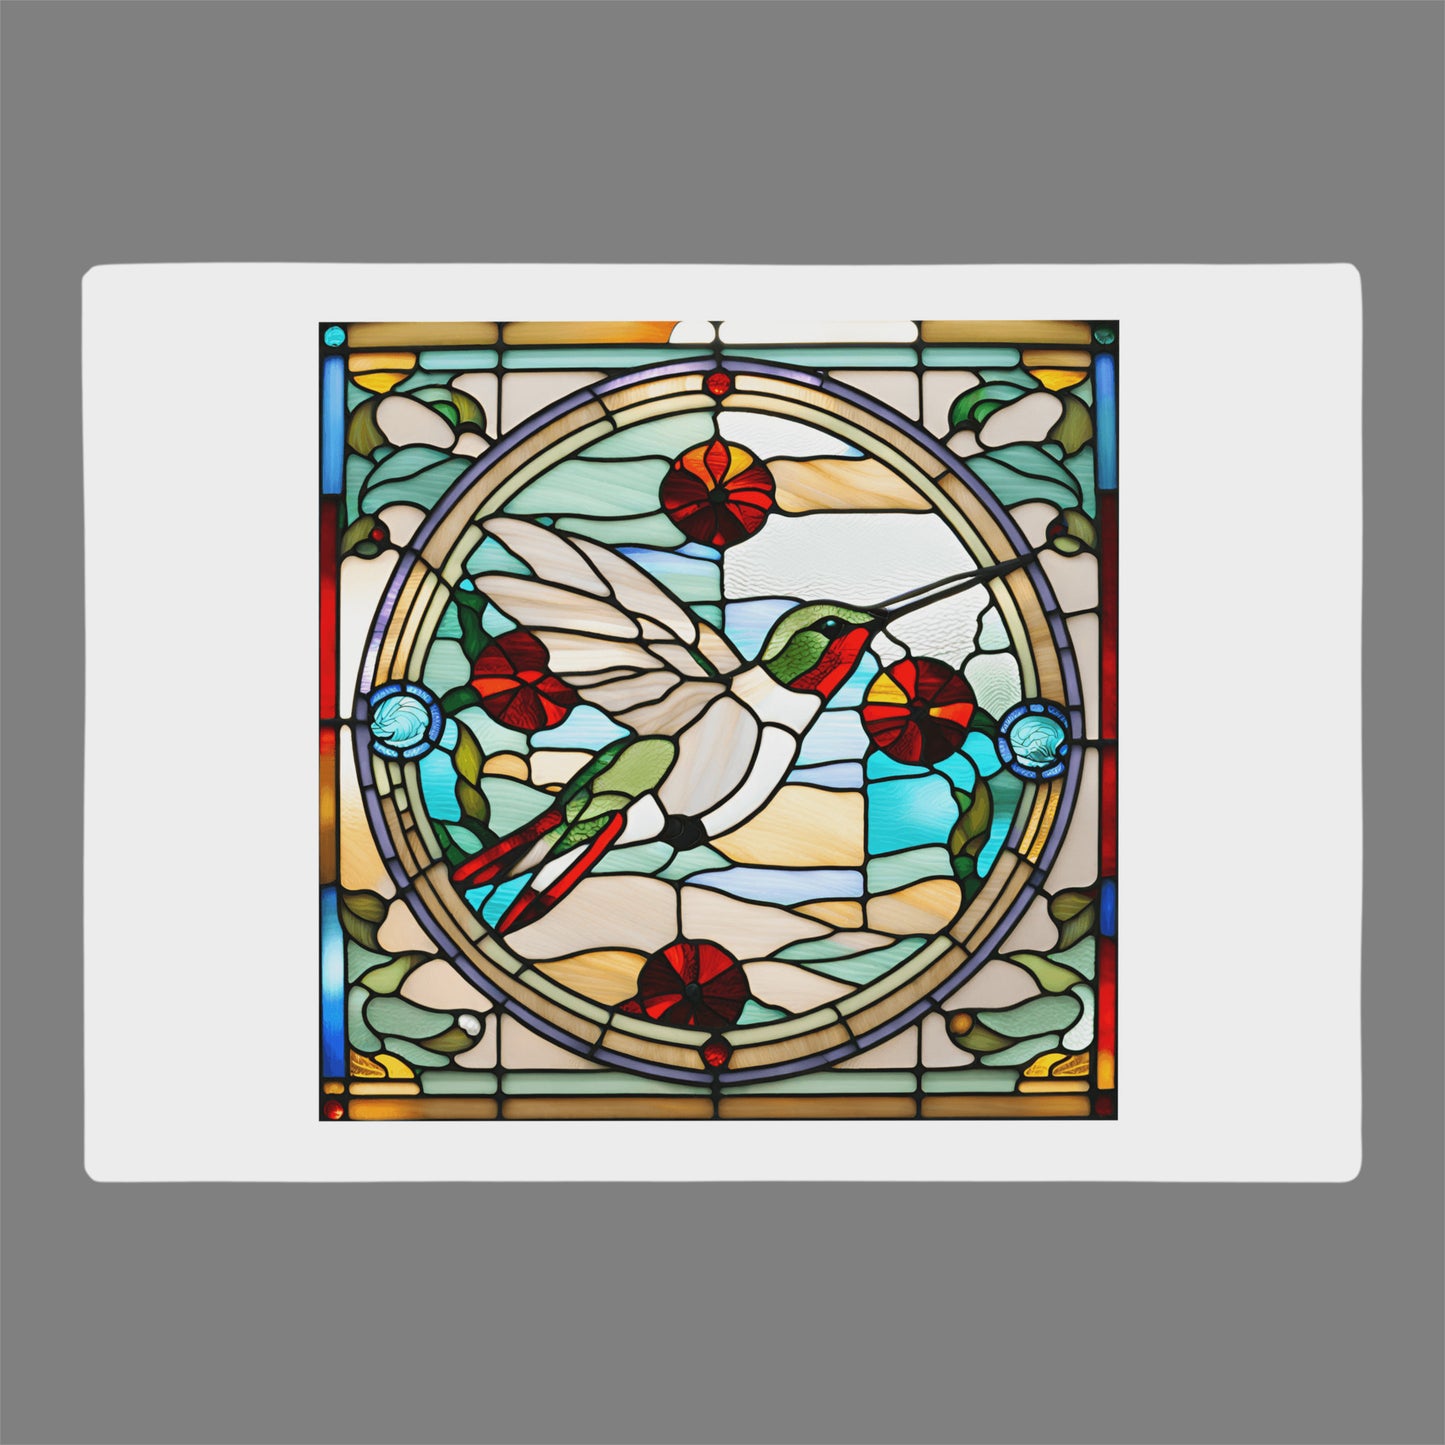 Hummingbird Stained glass printed on a glass cutting board great gift idea